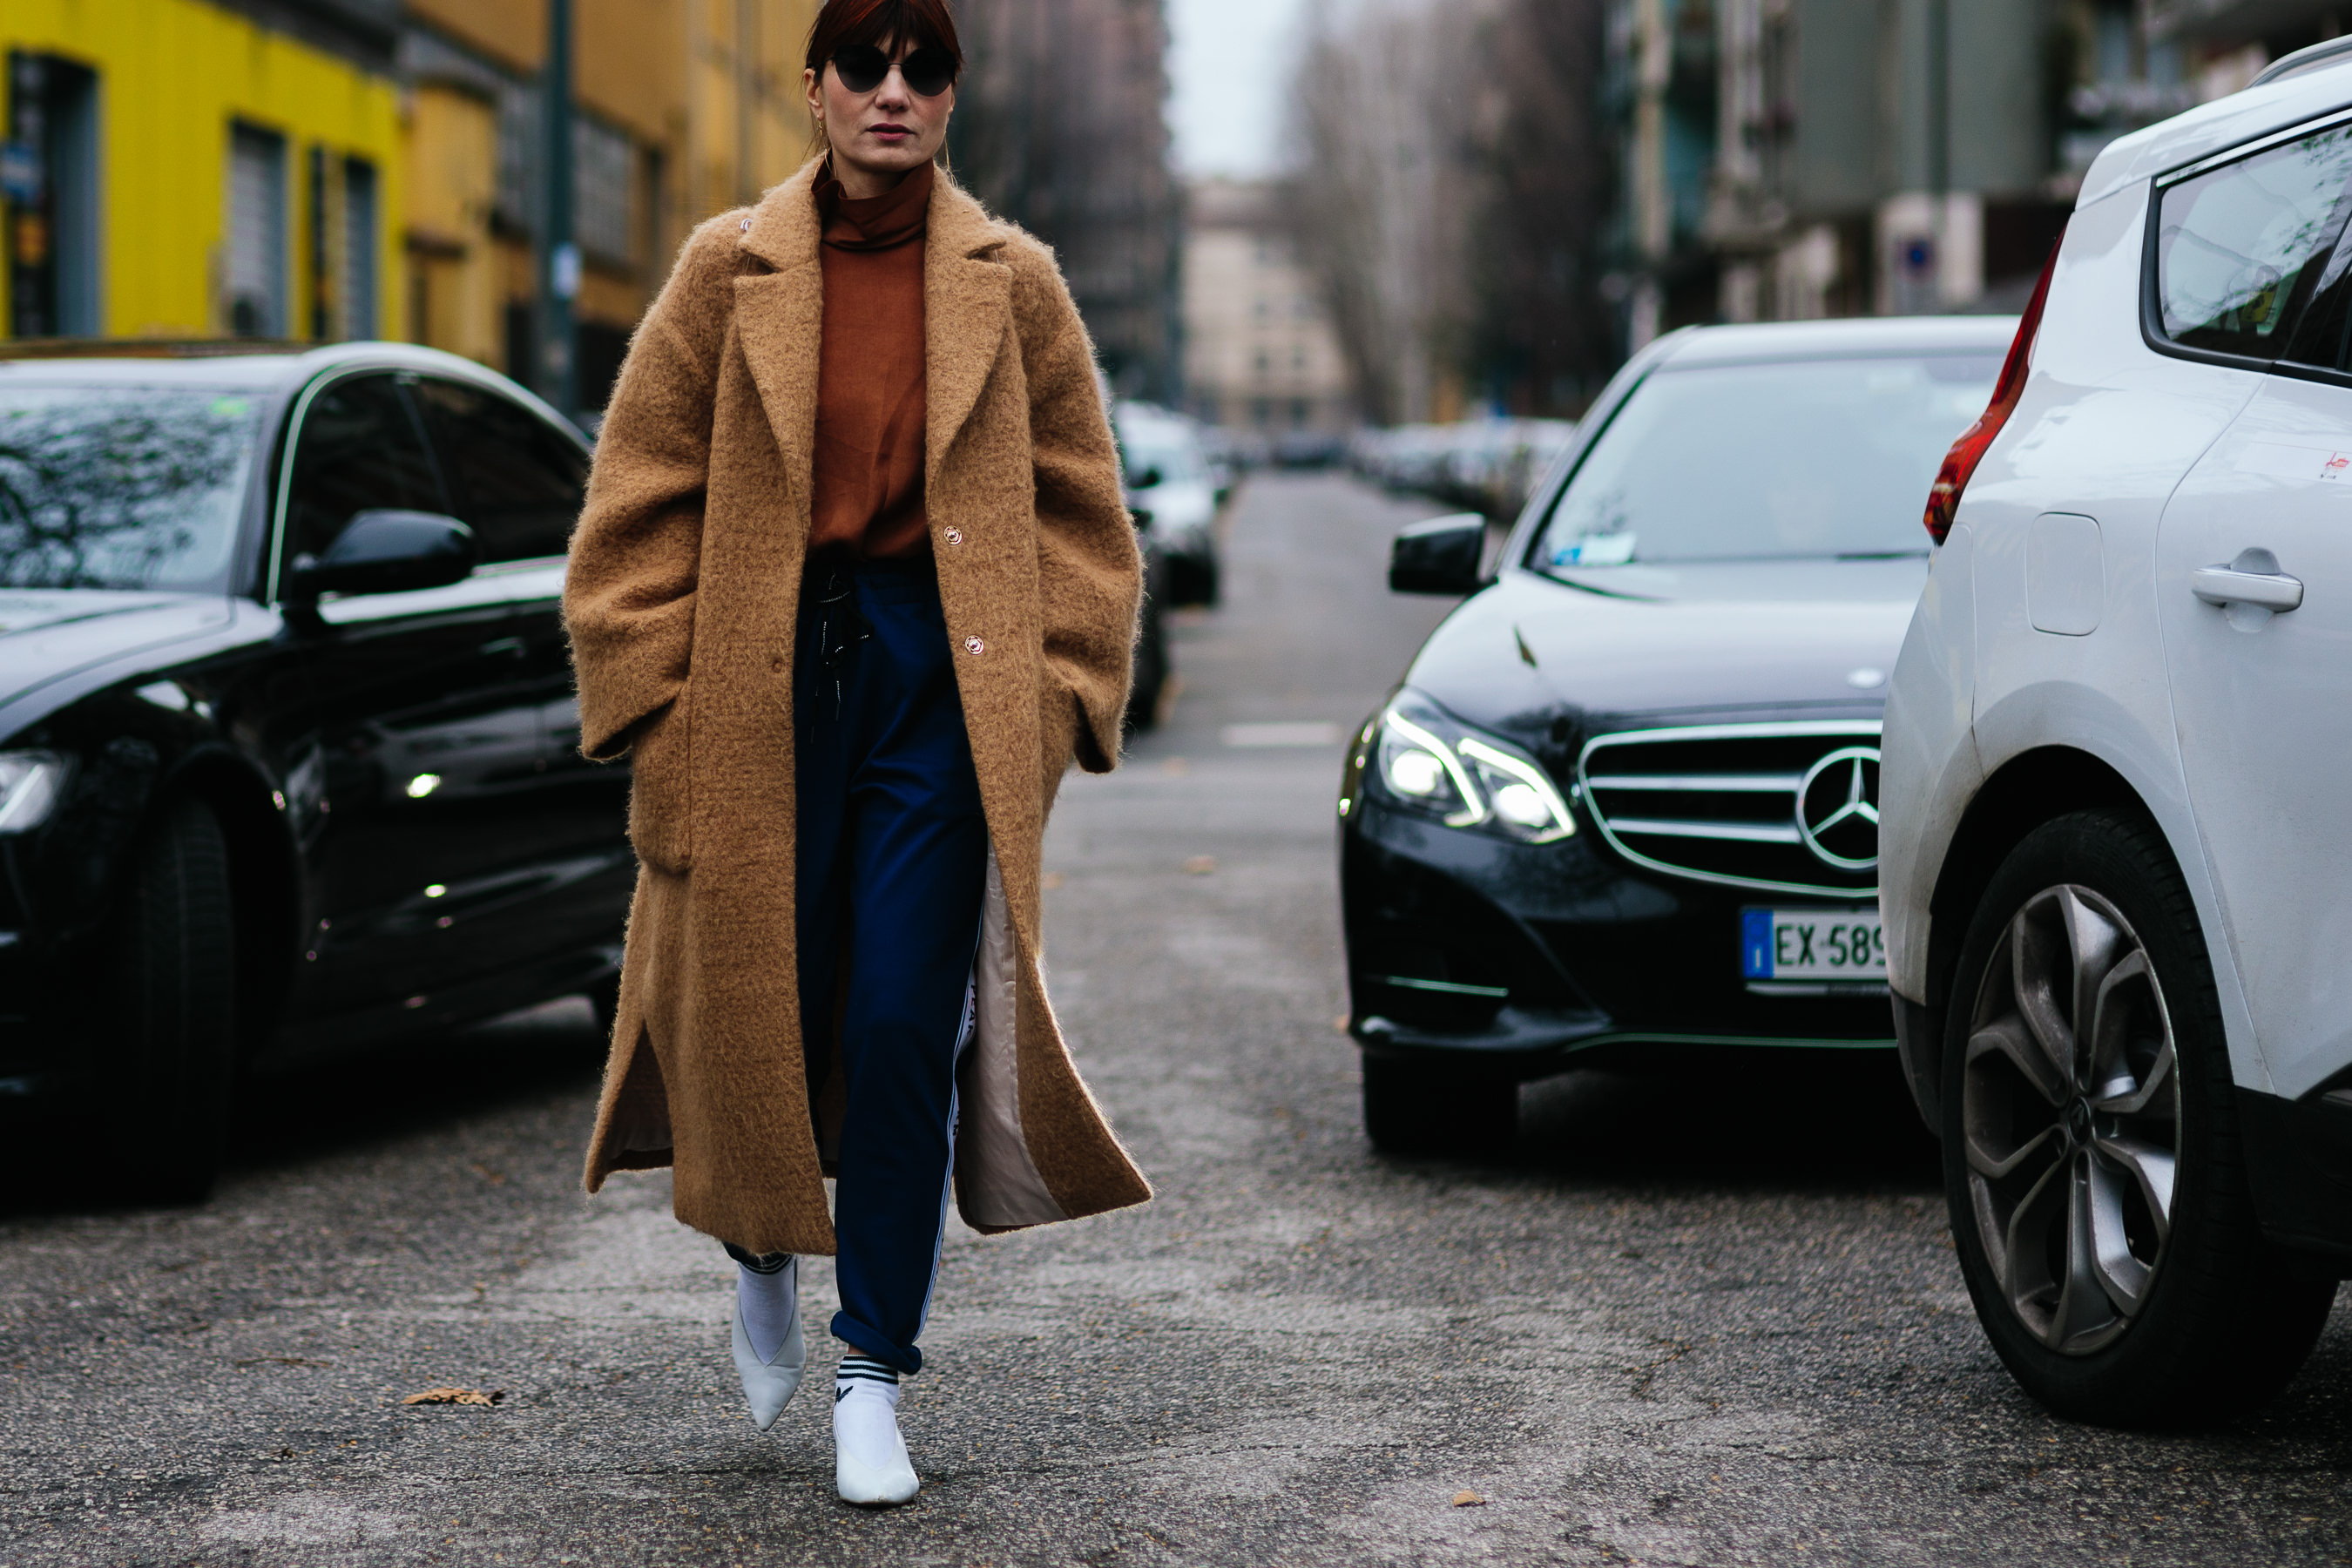 Italian woman wearing camel coat and white pumps